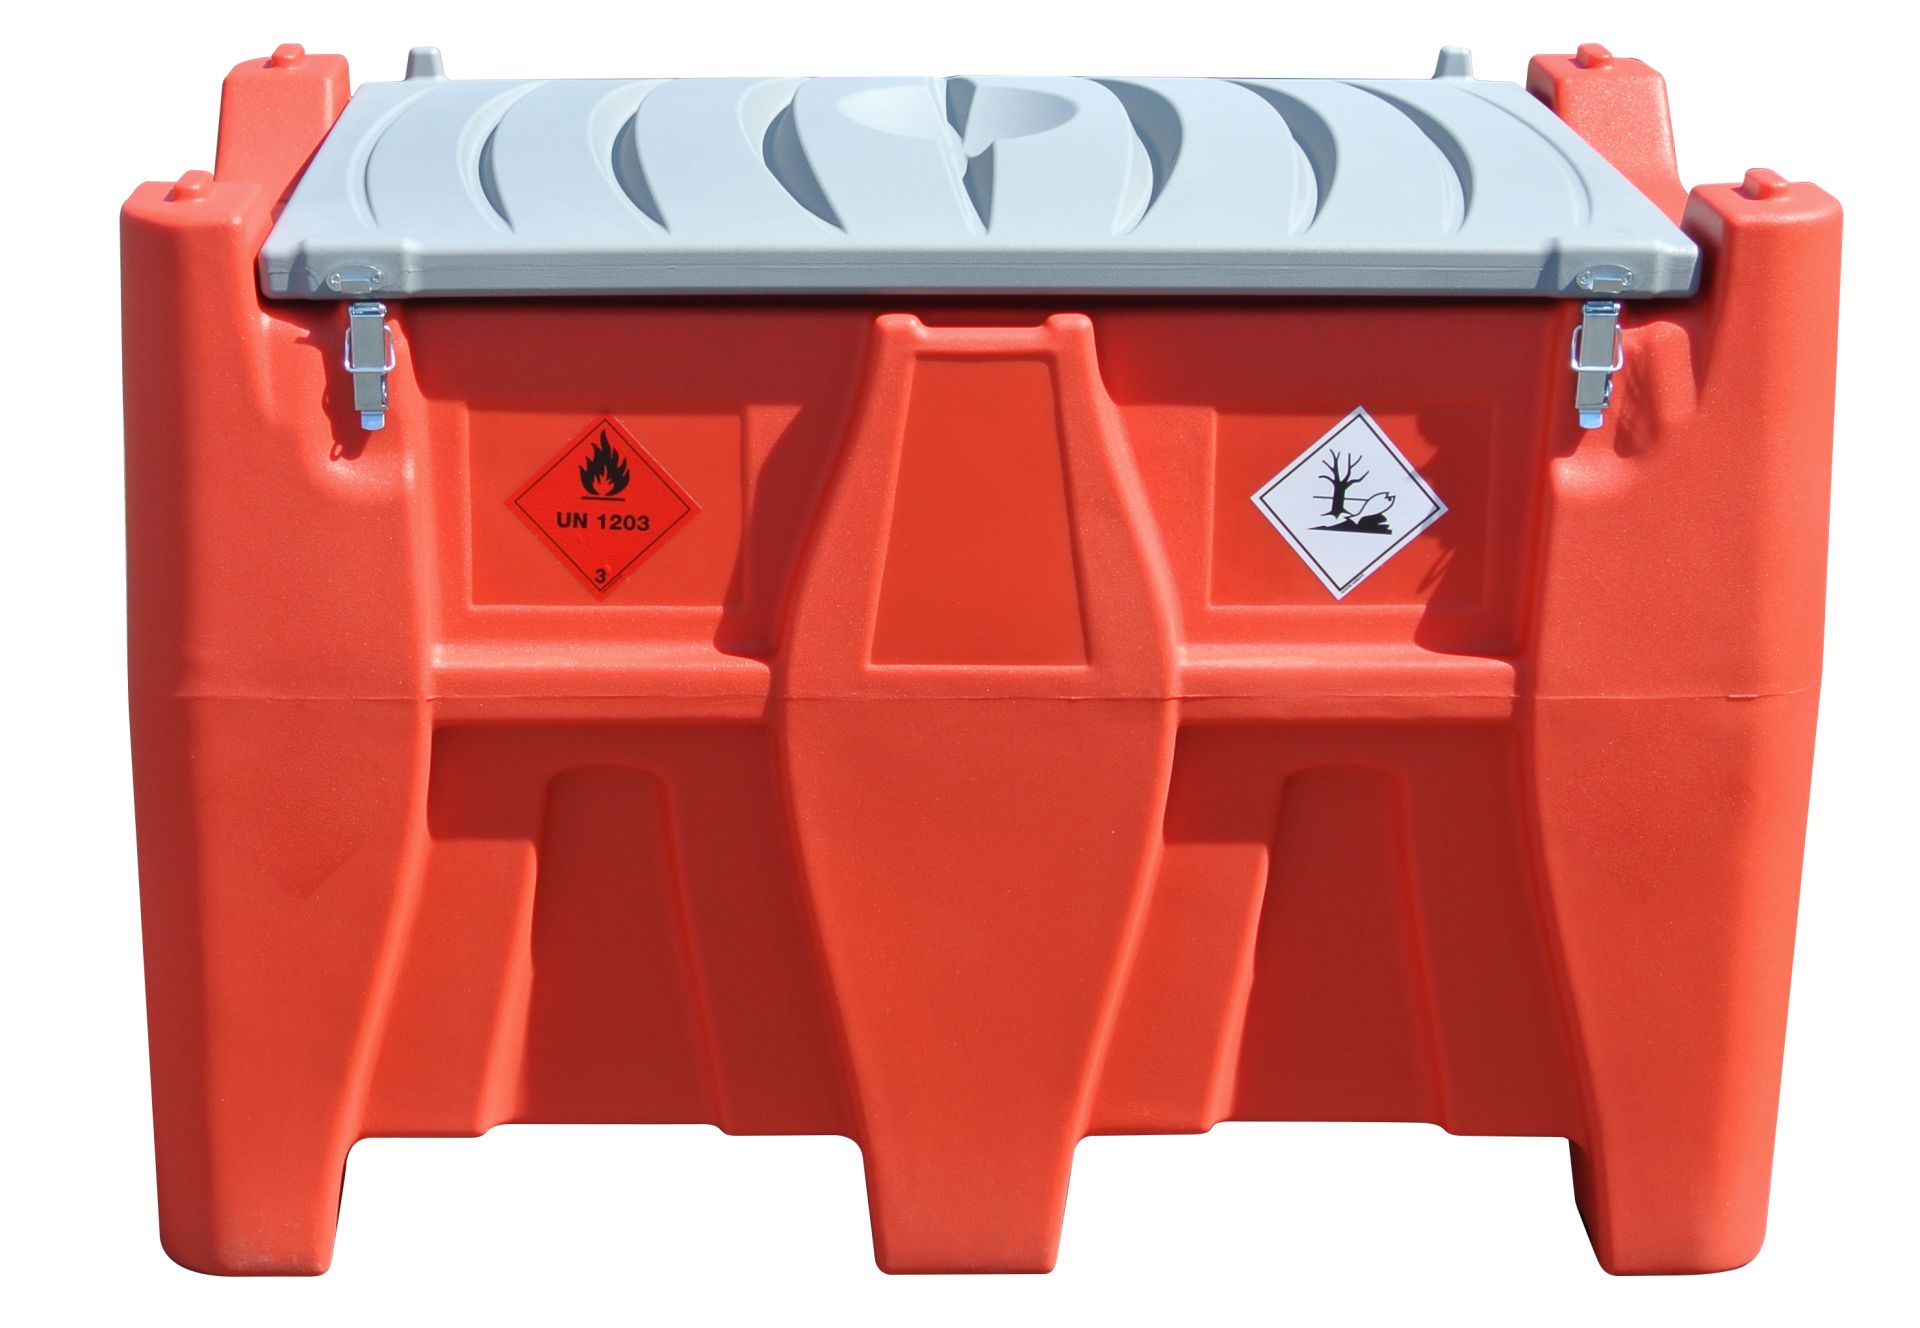 High Density Portable Gasoline Fuel Tank Container